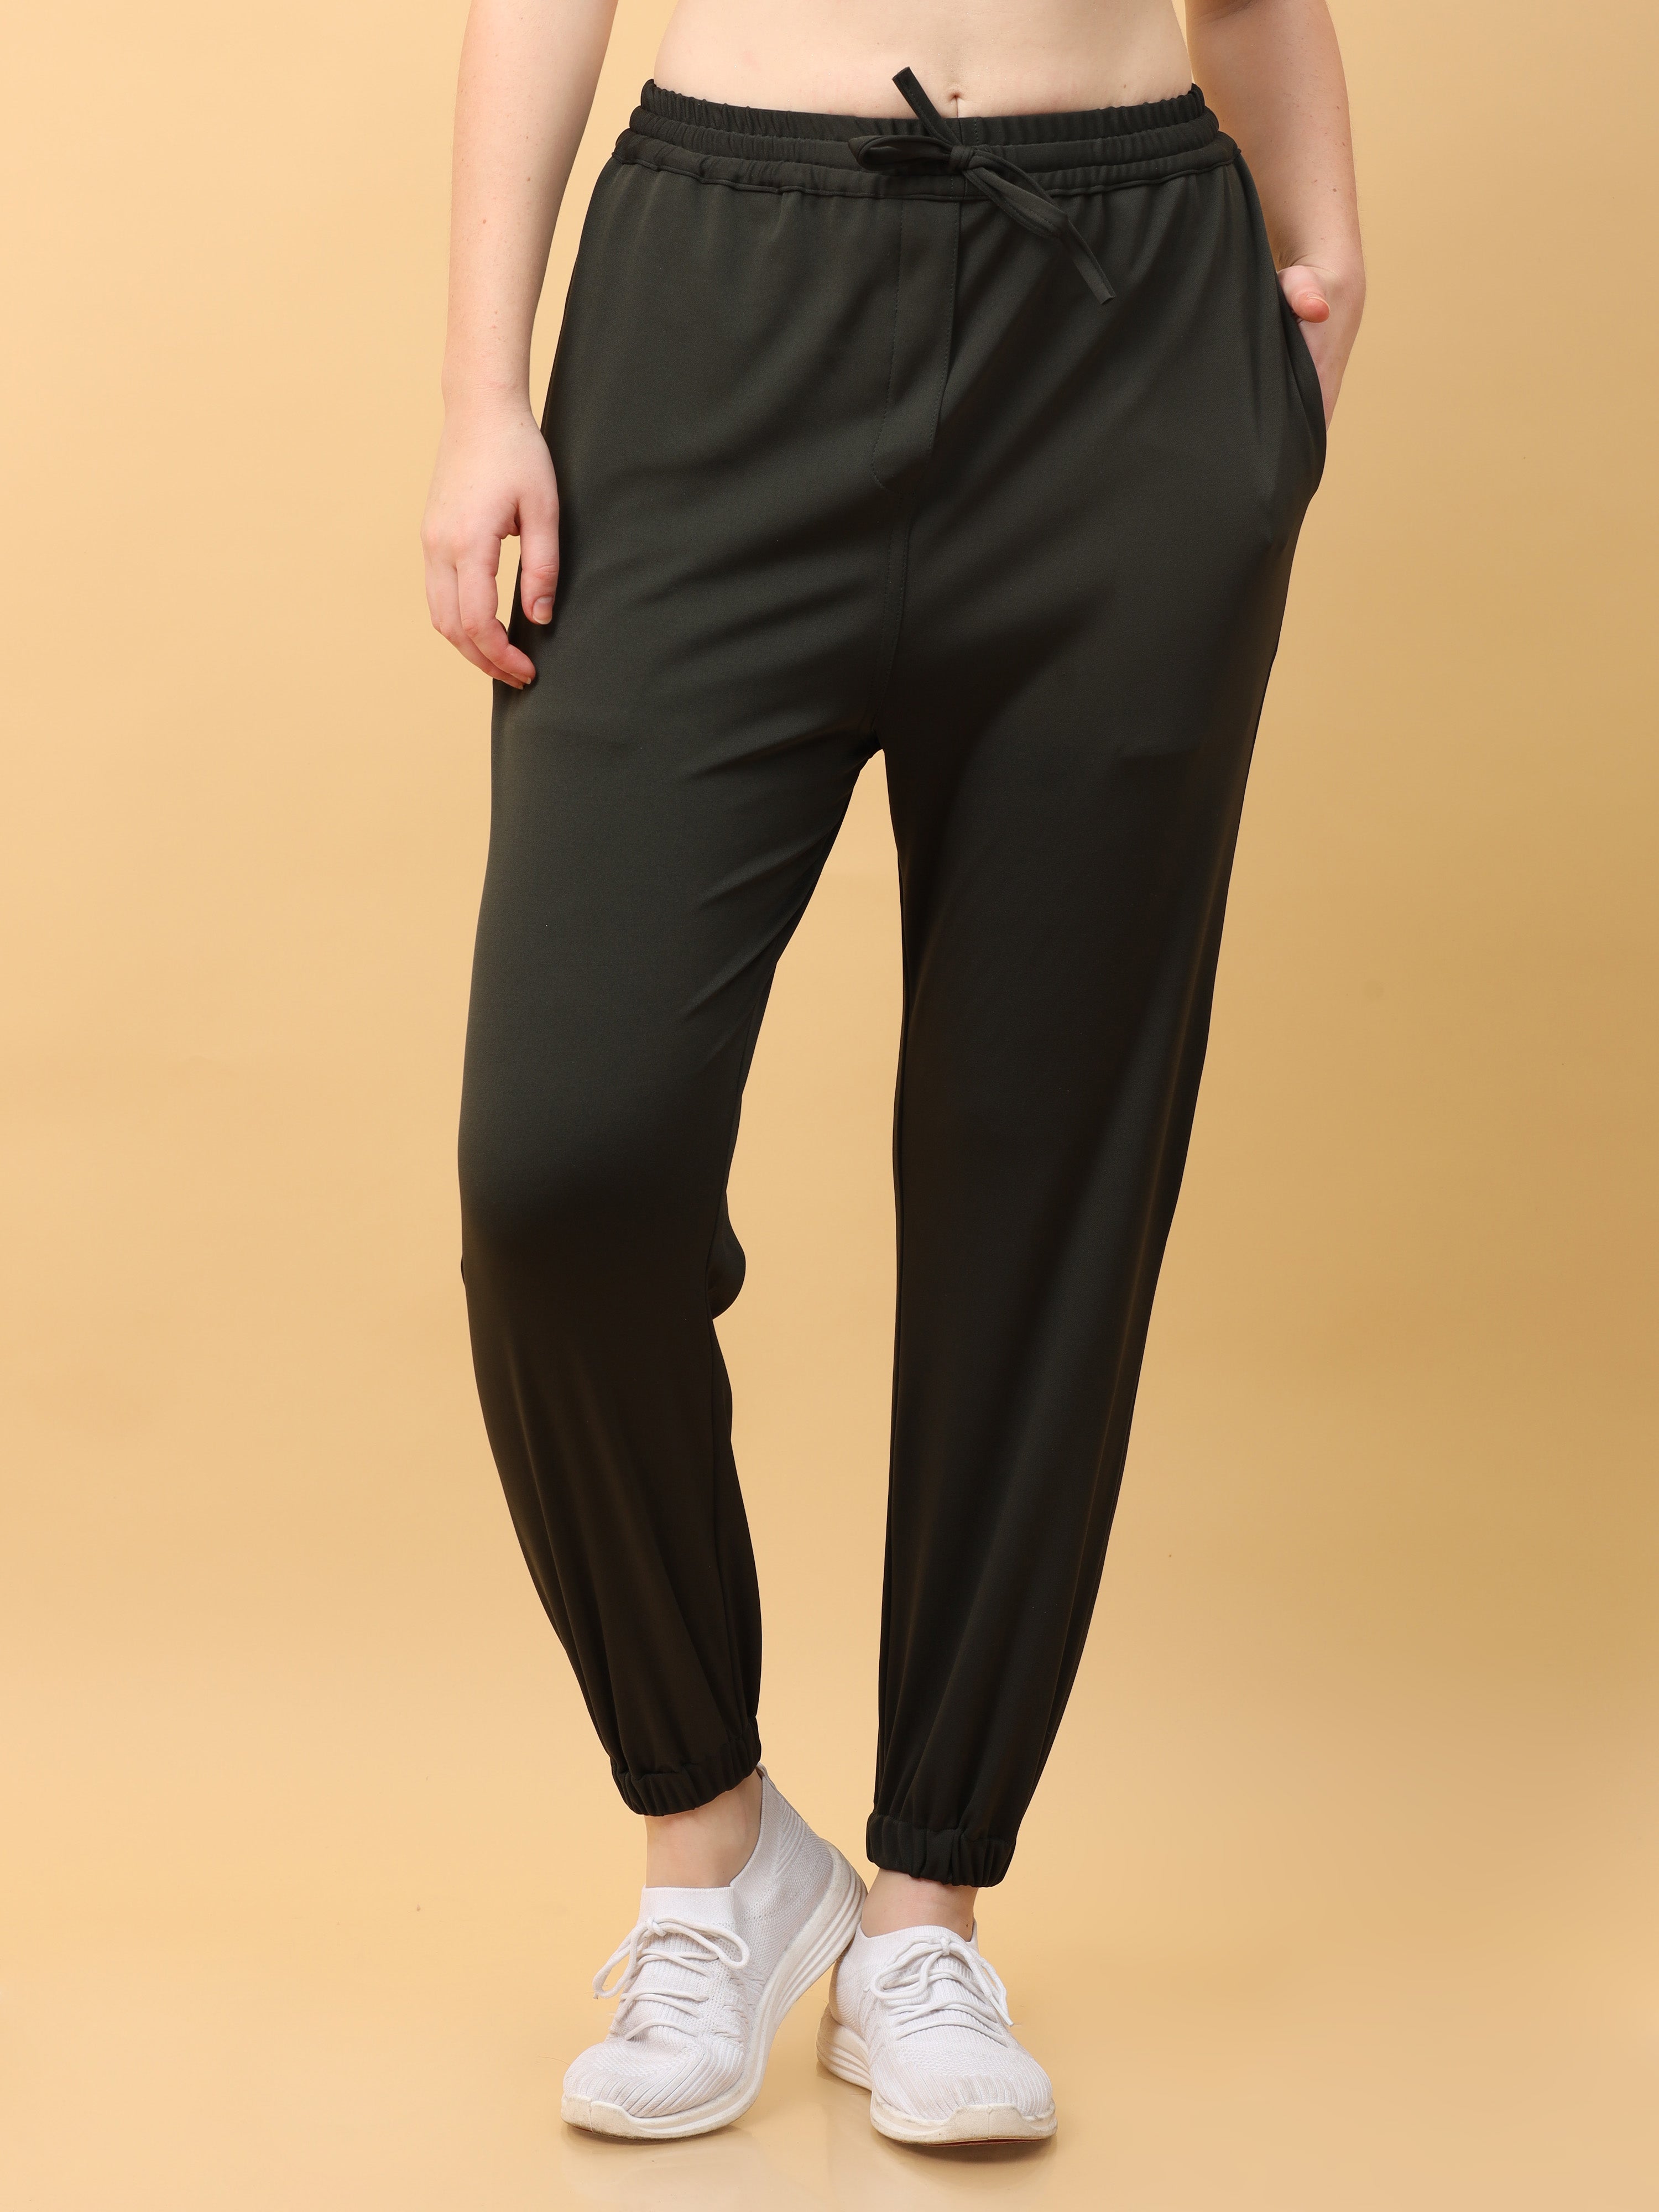 BEJONS Women Loose Fit Joggers Lounge Pants Sweatpants with India